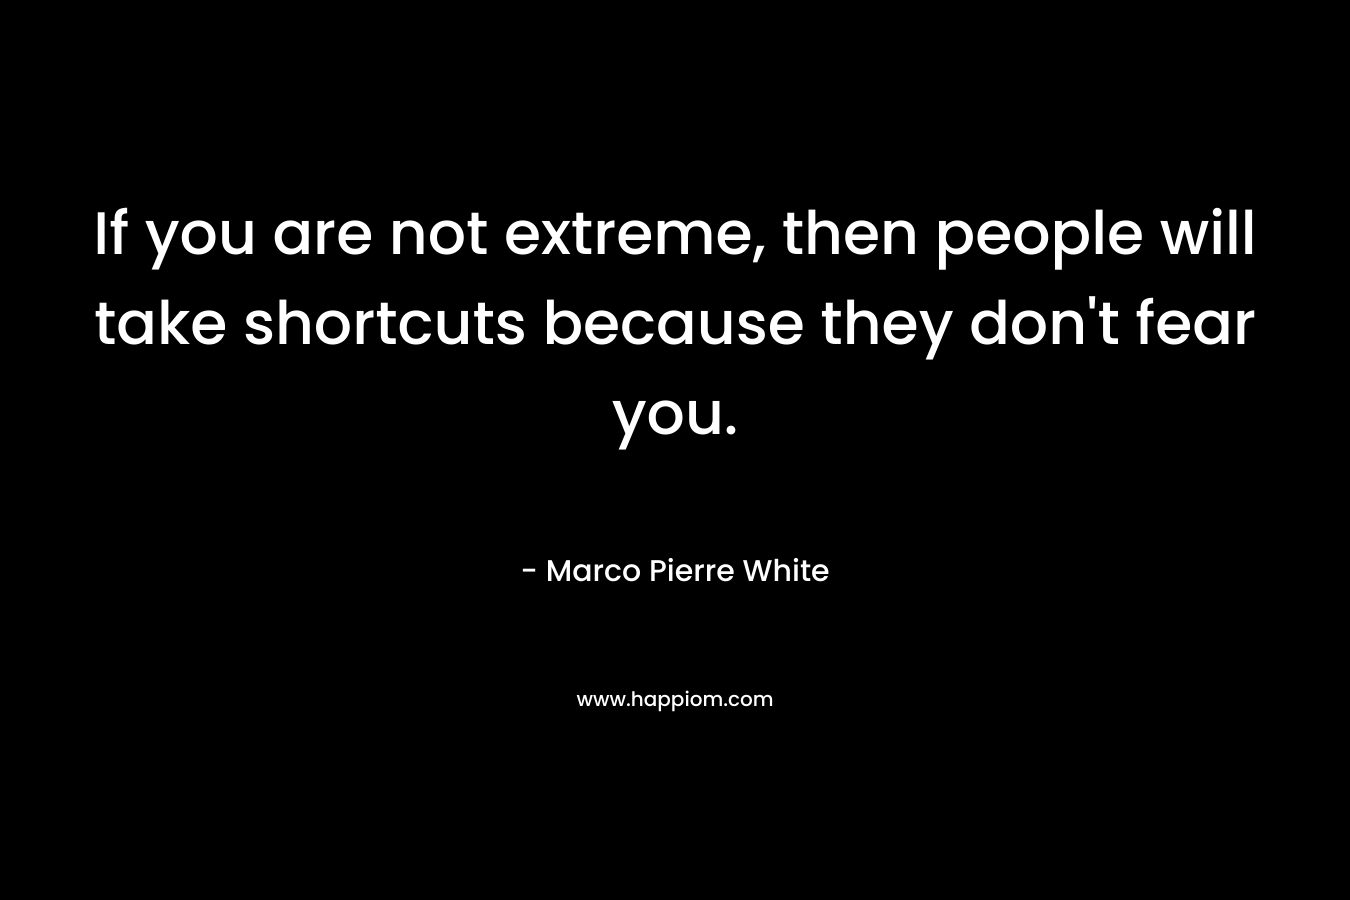 If you are not extreme, then people will take shortcuts because they don’t fear you. – Marco Pierre White